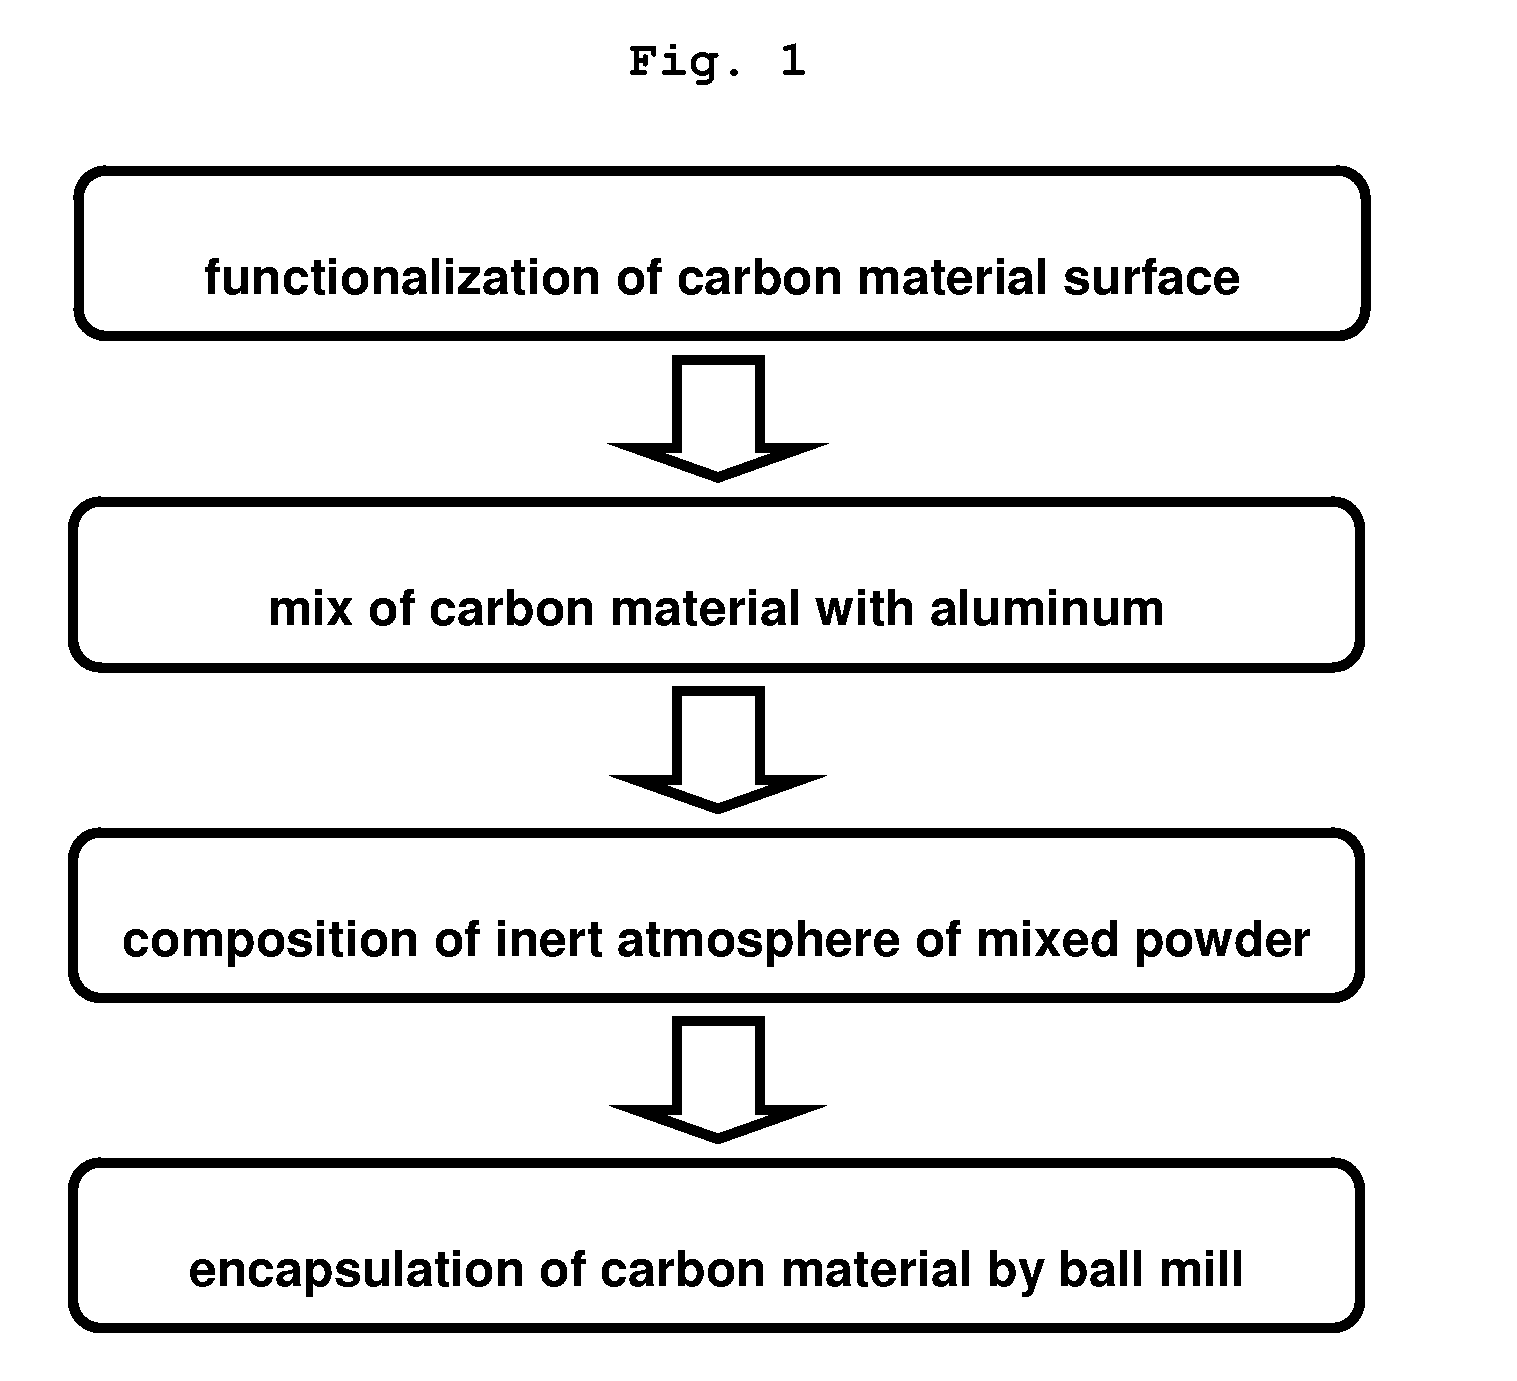 Encapsulation of carbon material within aluminum